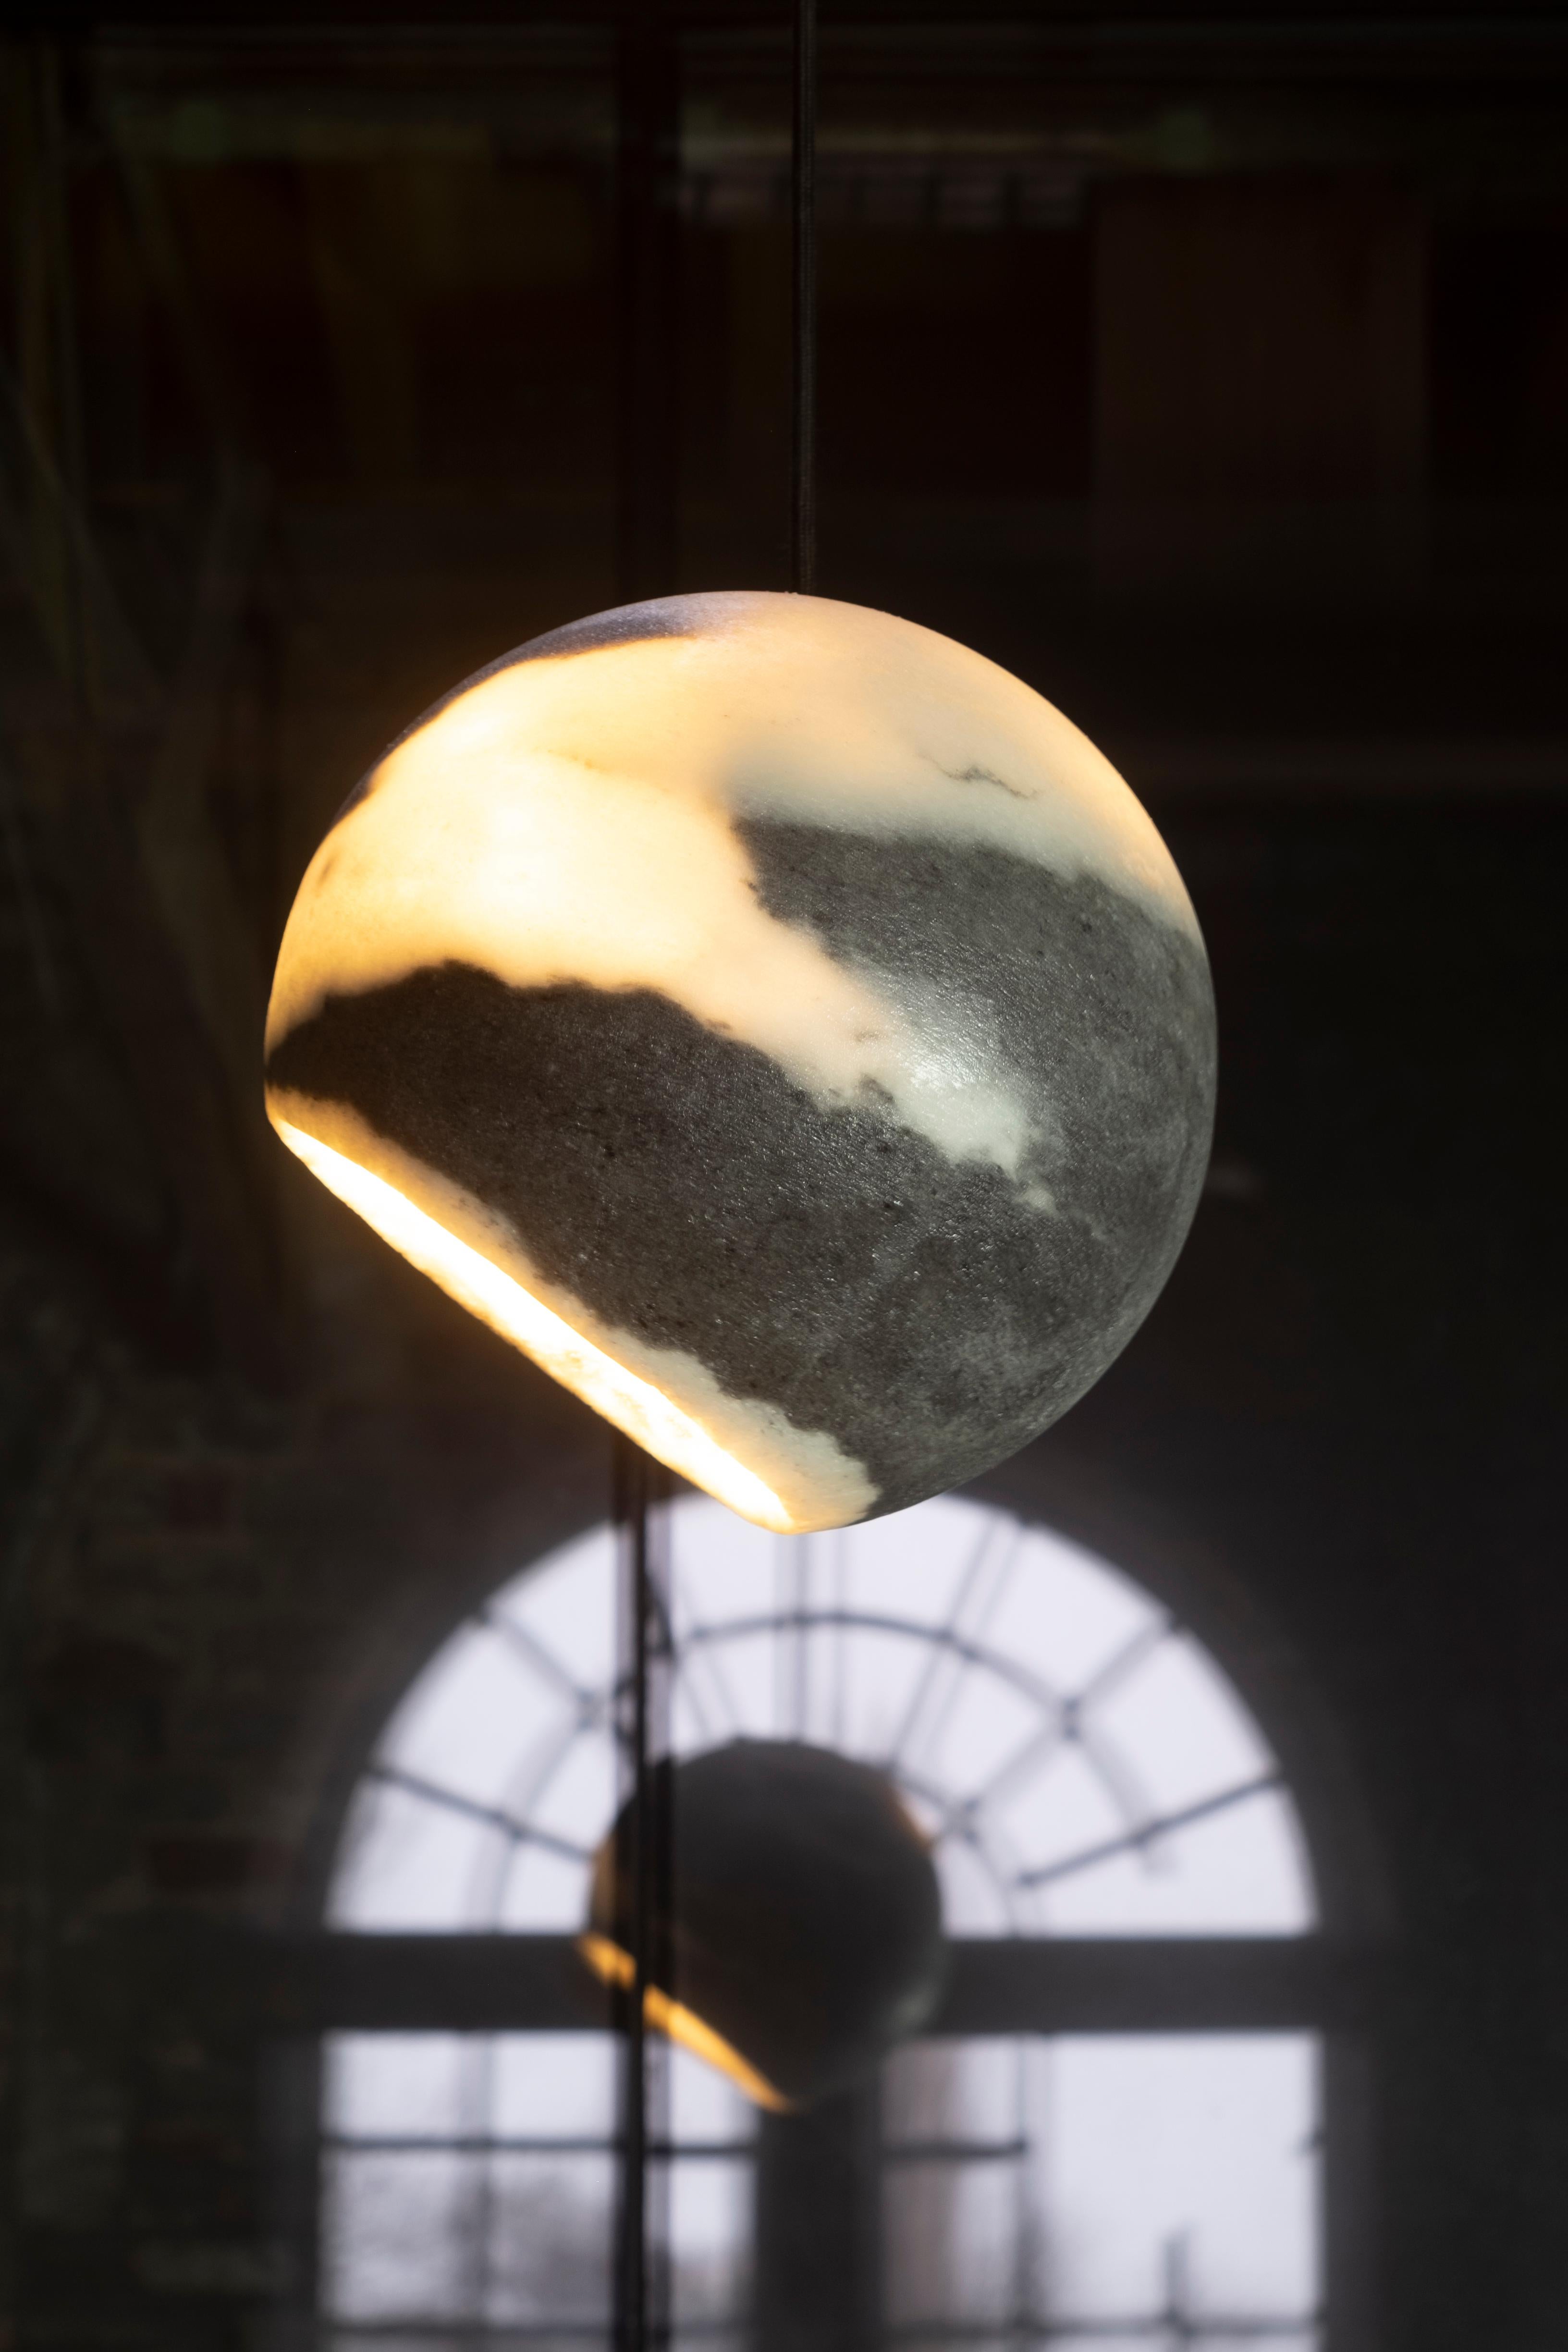 Medium Eclipse Lamp by Roxane Lahidji
Dimensions: D 25 x H 25 cm
Material: Marbled salts
A unique award winning technique developed by Roxane Lahidji

Award winner of Bolia Design Awards 2019 and FD100 and present in the collections of the Design